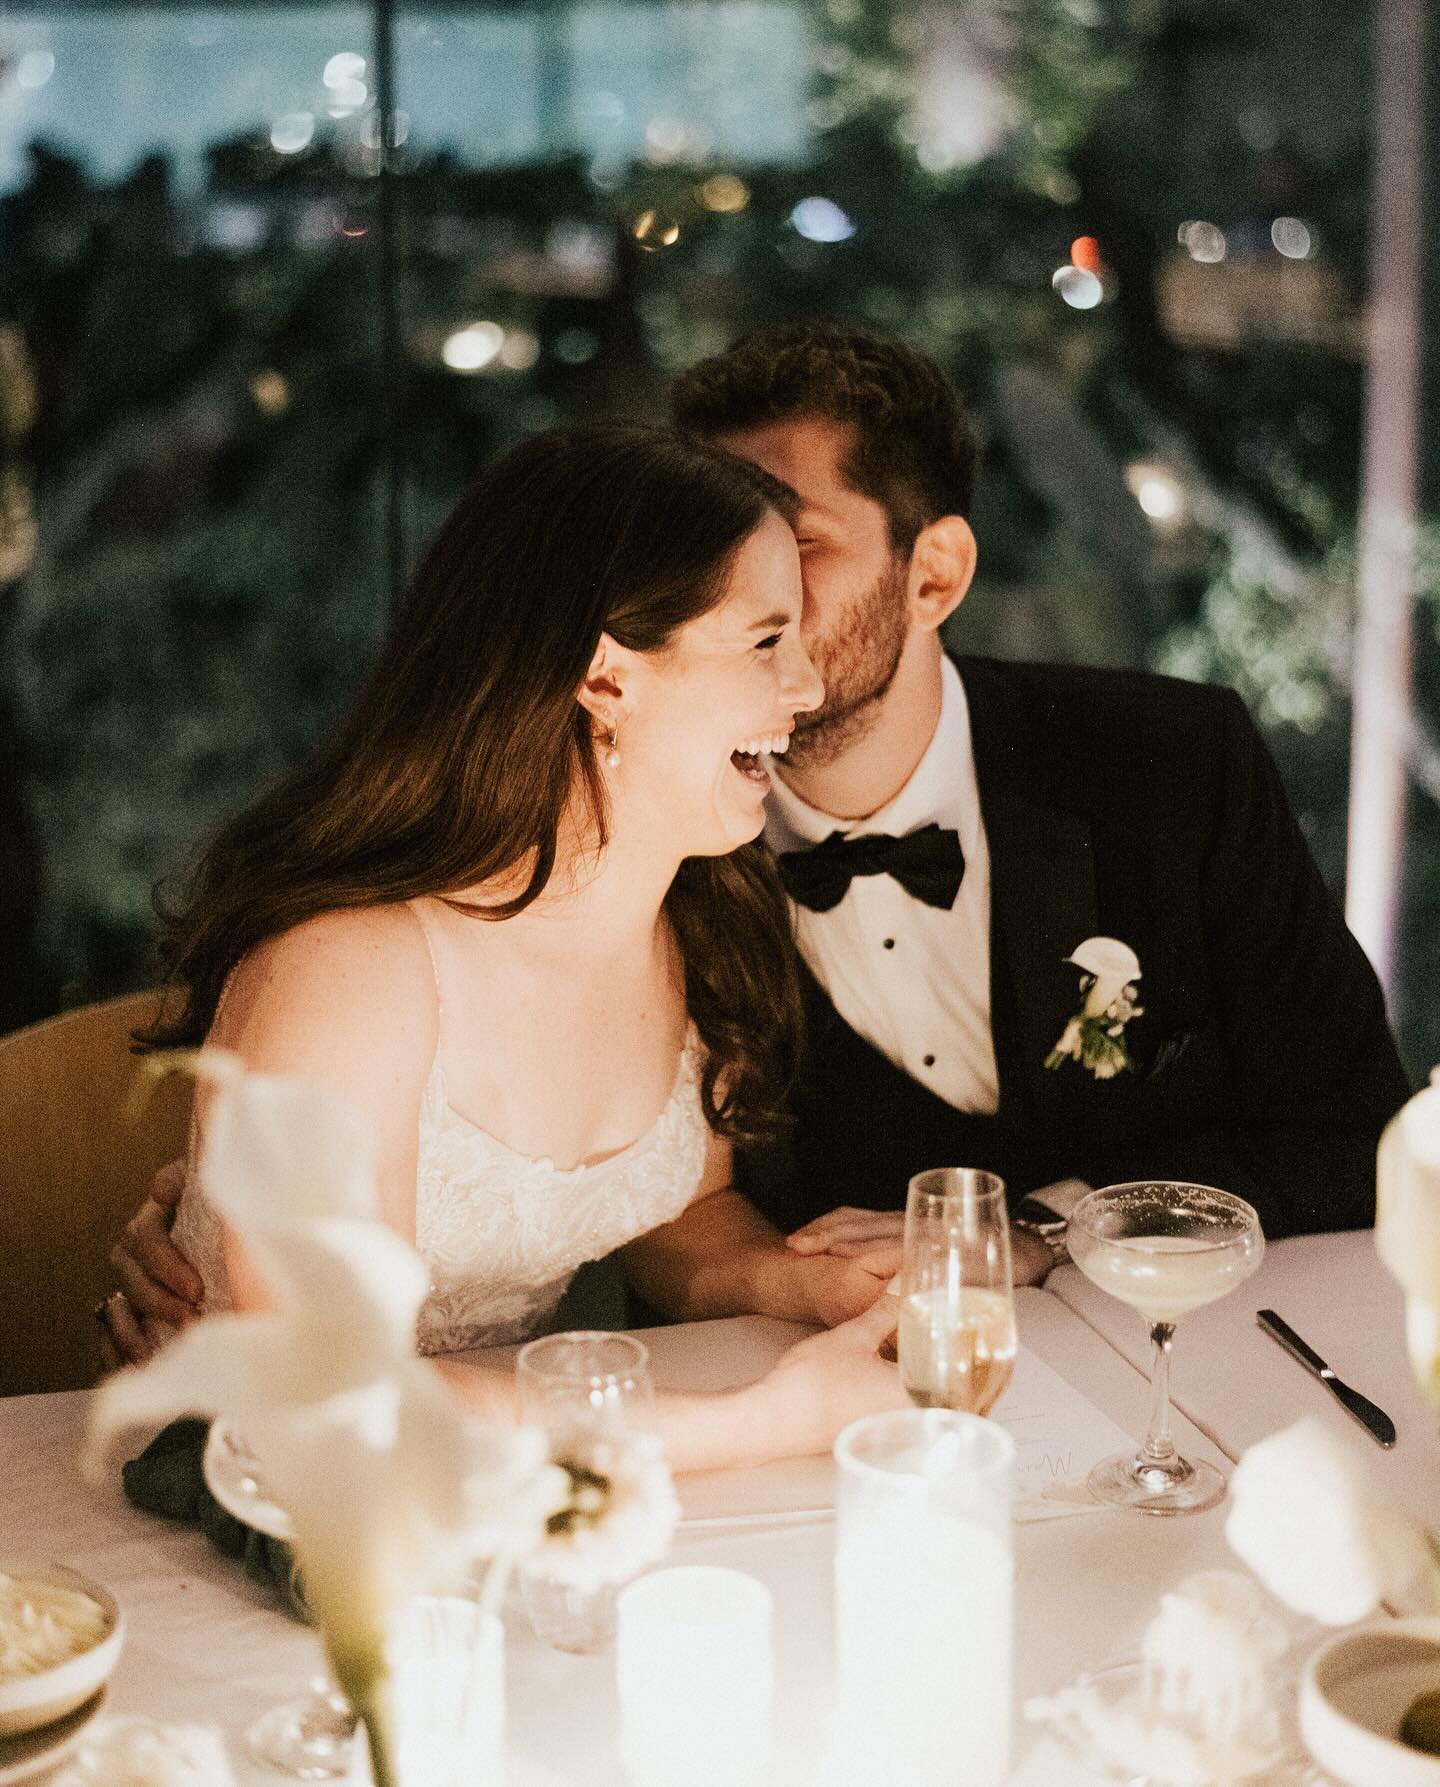 Layout and flow of a wedding are important factors to consider when deciding how you want your wedding day to feel.
Where will people be seated? Next to whom? What will their view of the room be? How is the lighting? When will your guests eat? When w